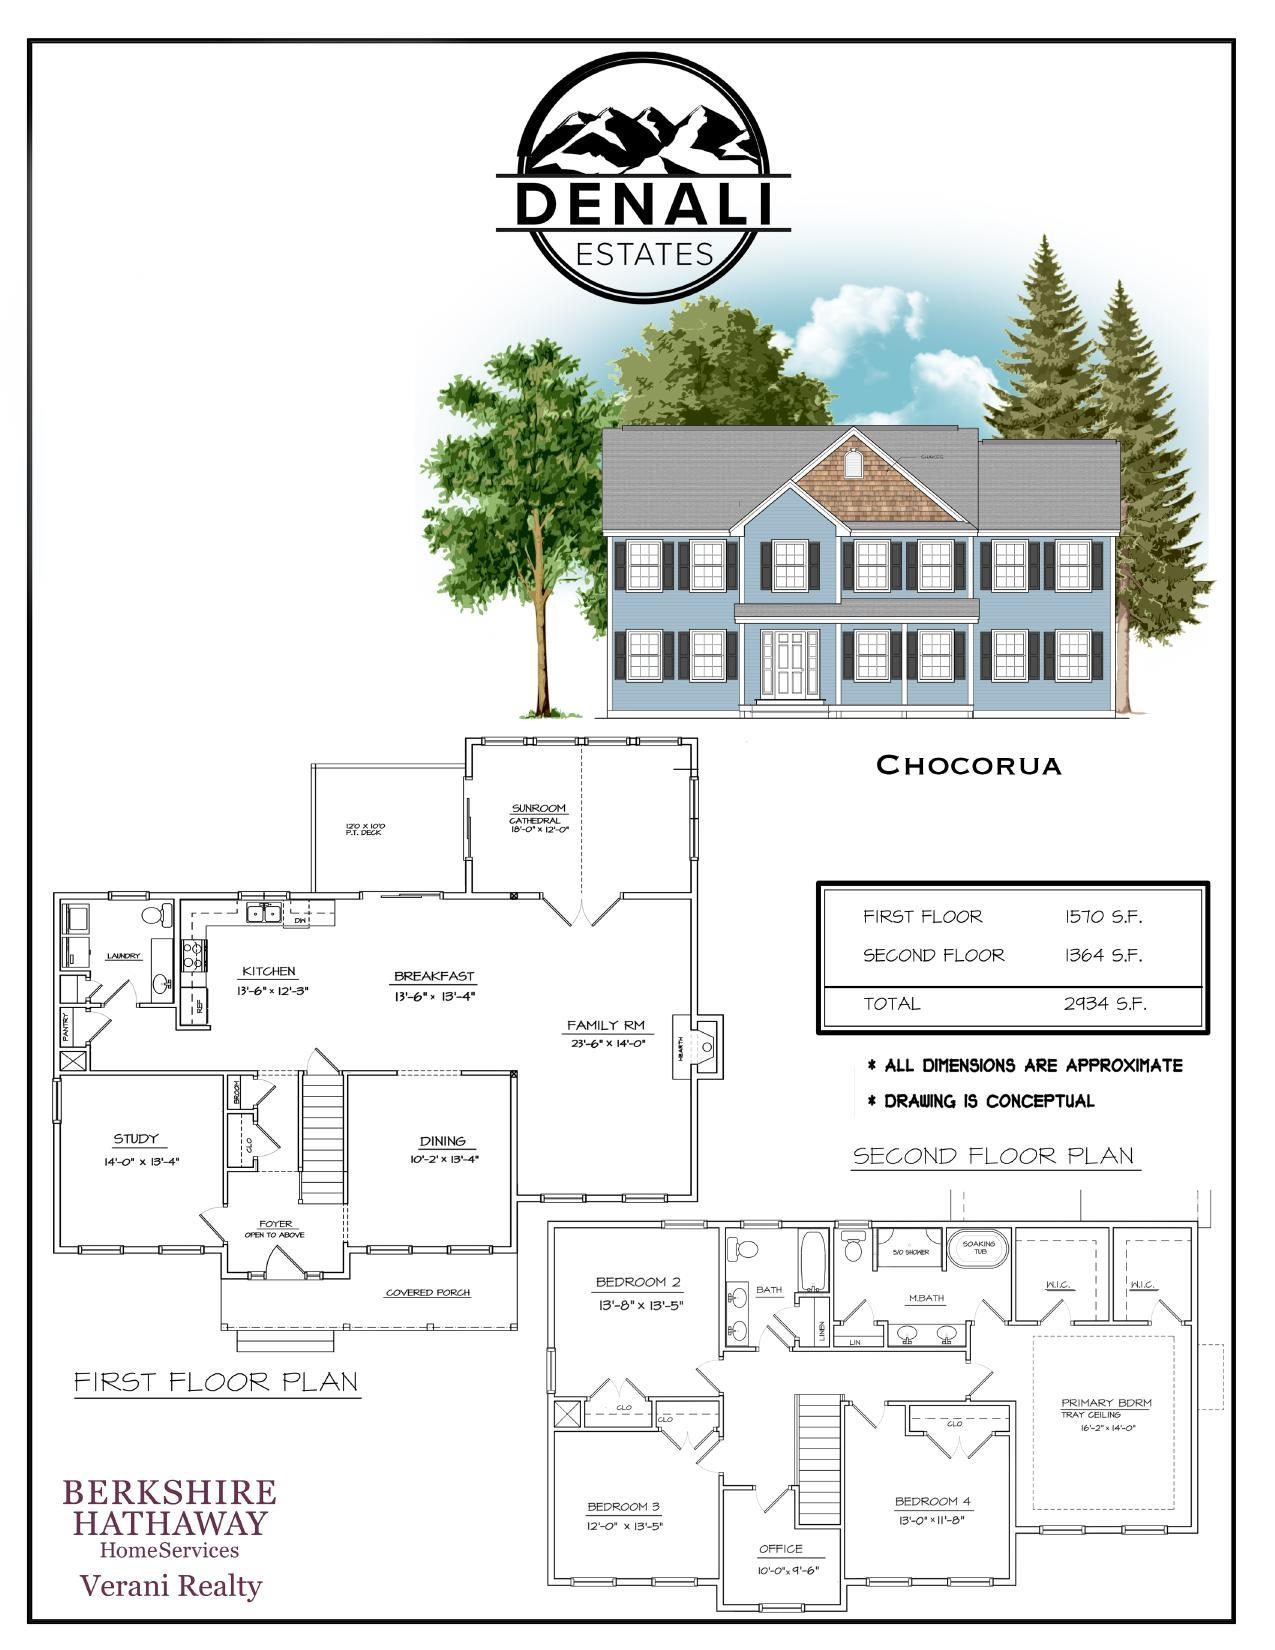 ***To be built**** New model for Denali Estates called the " Chocorua" A Colonial style home with 3 car garage under. Town water, Cathedral sunroom and more.  ( a ranch was originally offered however builder has added a new model which fits the lot much better)